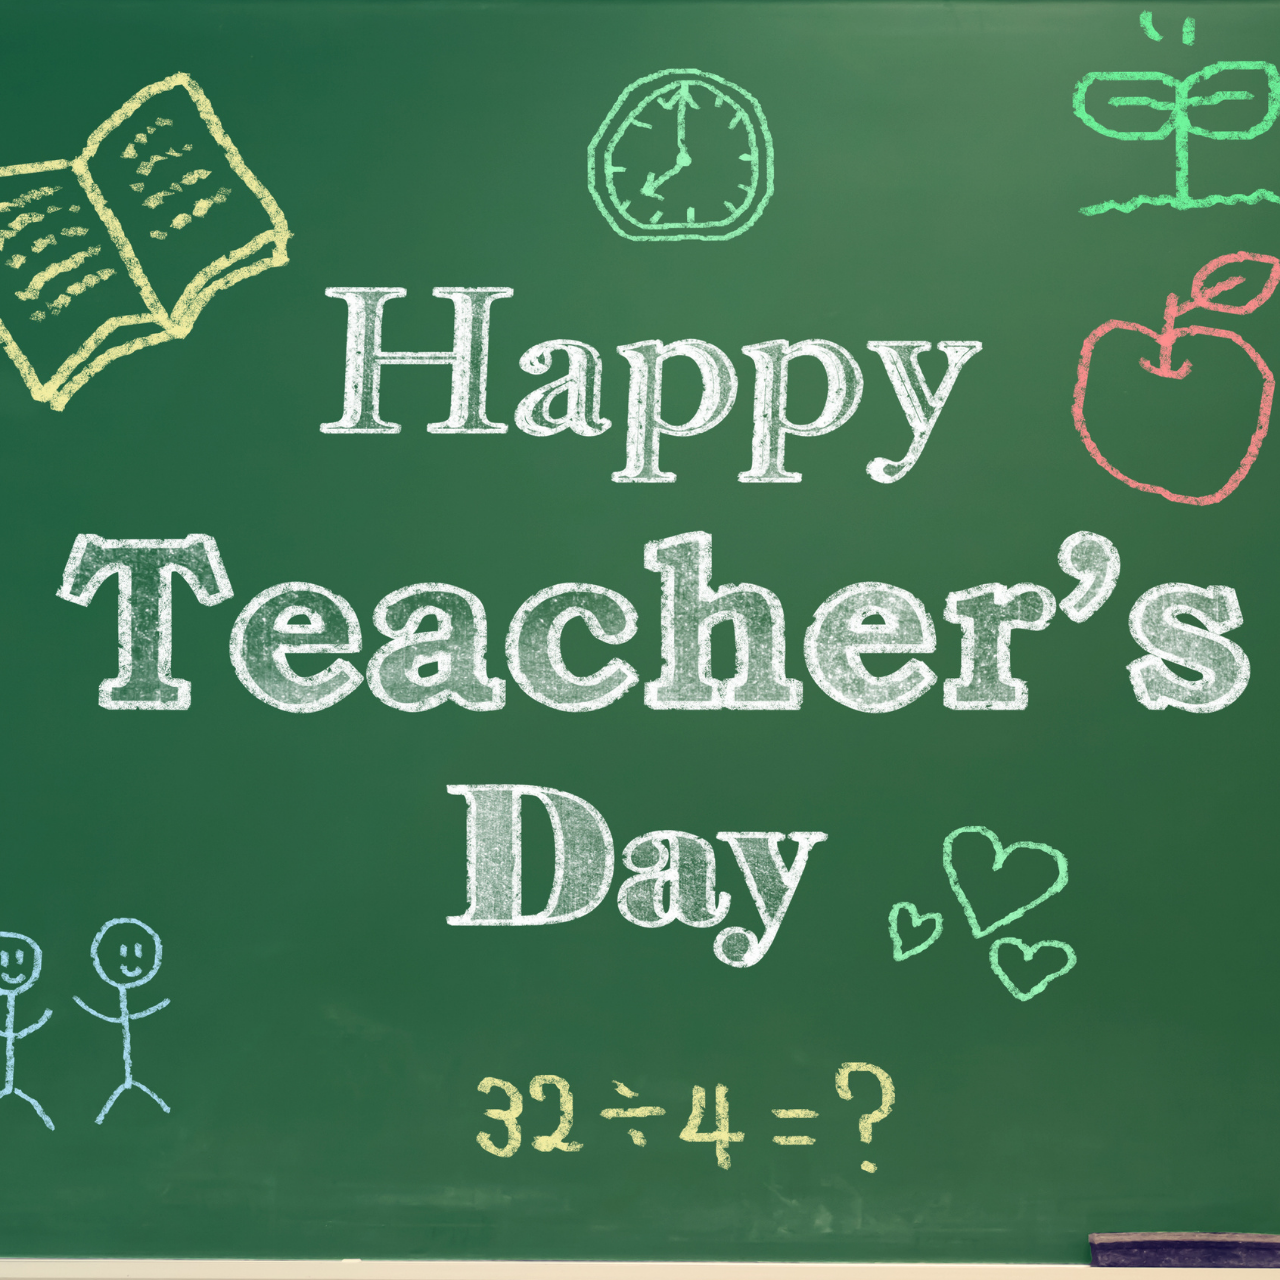 Happy Teachers' Day 2021 Quotes, Wishes, Thought, HD Images, and Greetings to greet your teachers